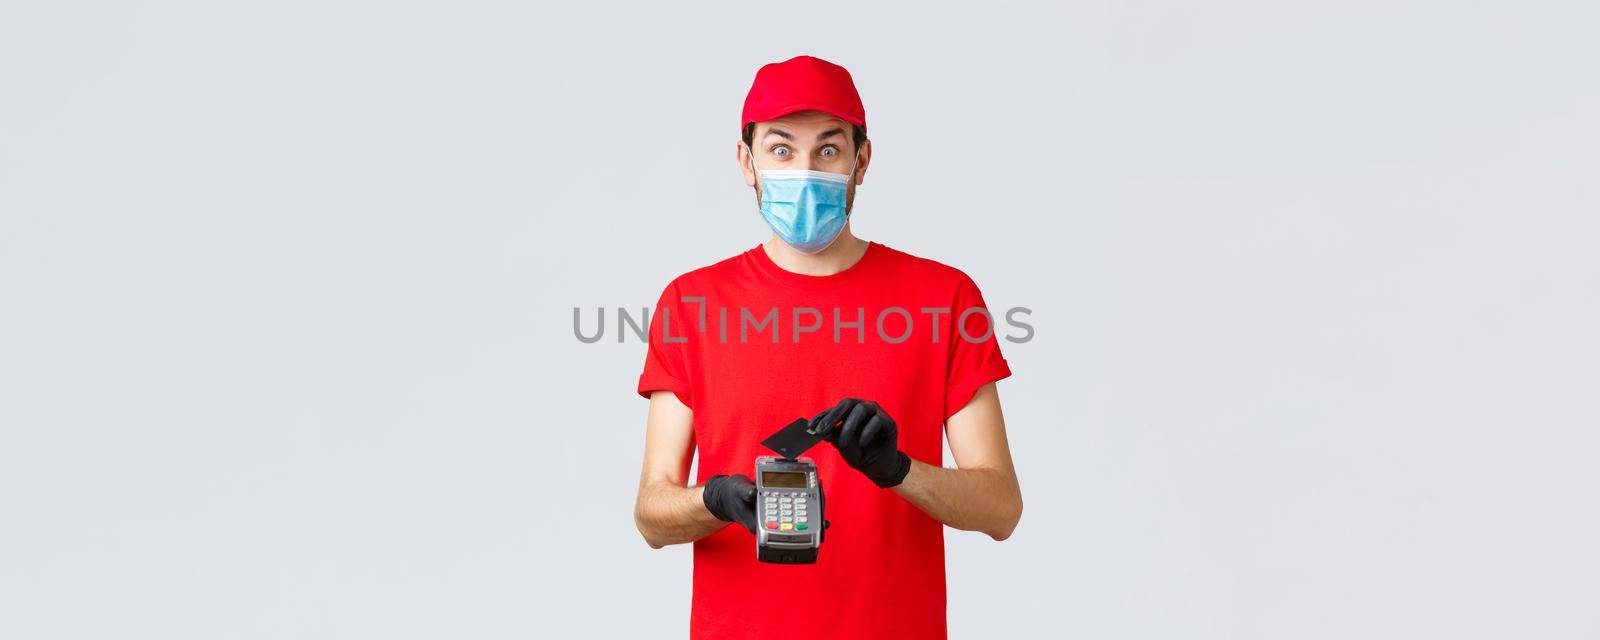 Contactless delivery, payment and online shopping during covid-19, self-quarantine. Excited courier in red uniform, face mask and gloves, look surprised, using credit card on paying terminal POS.